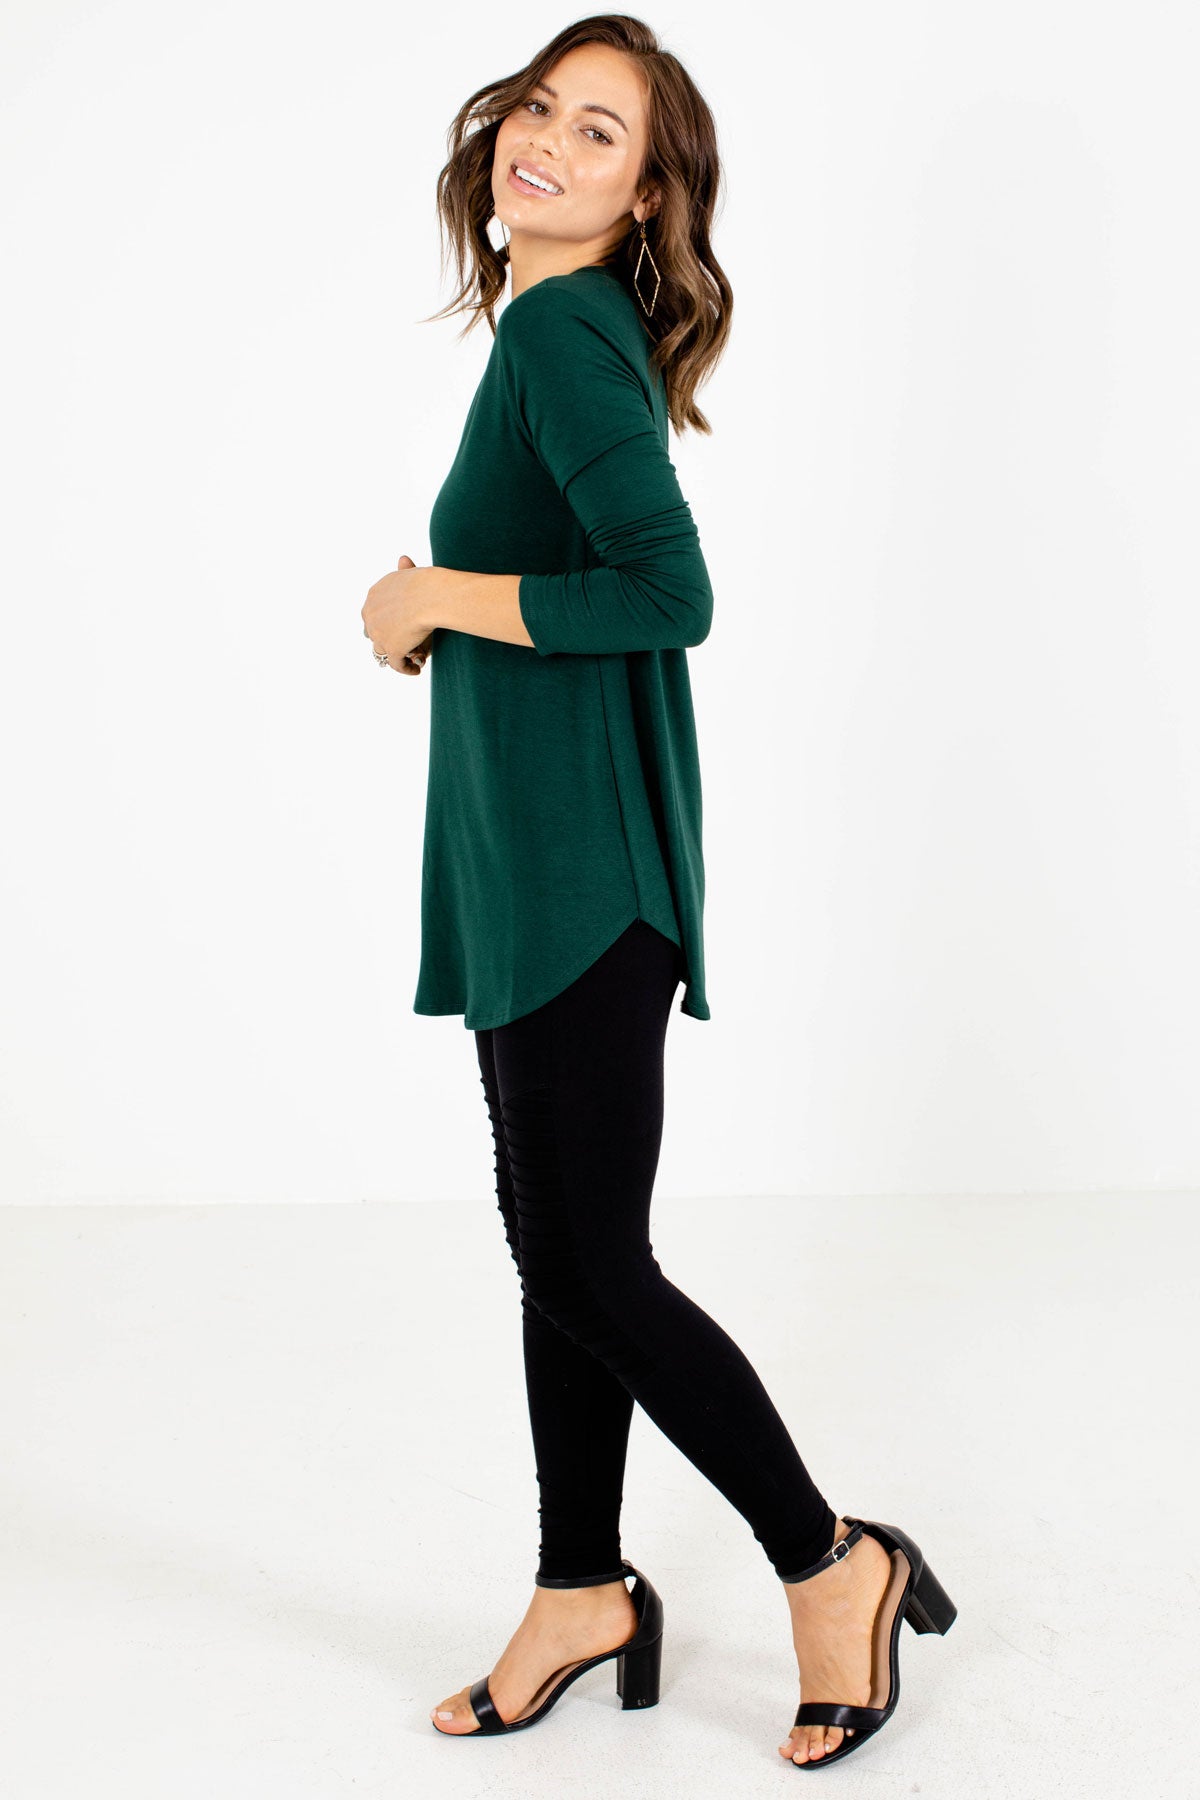 Women's Green Everyday Boutique Top